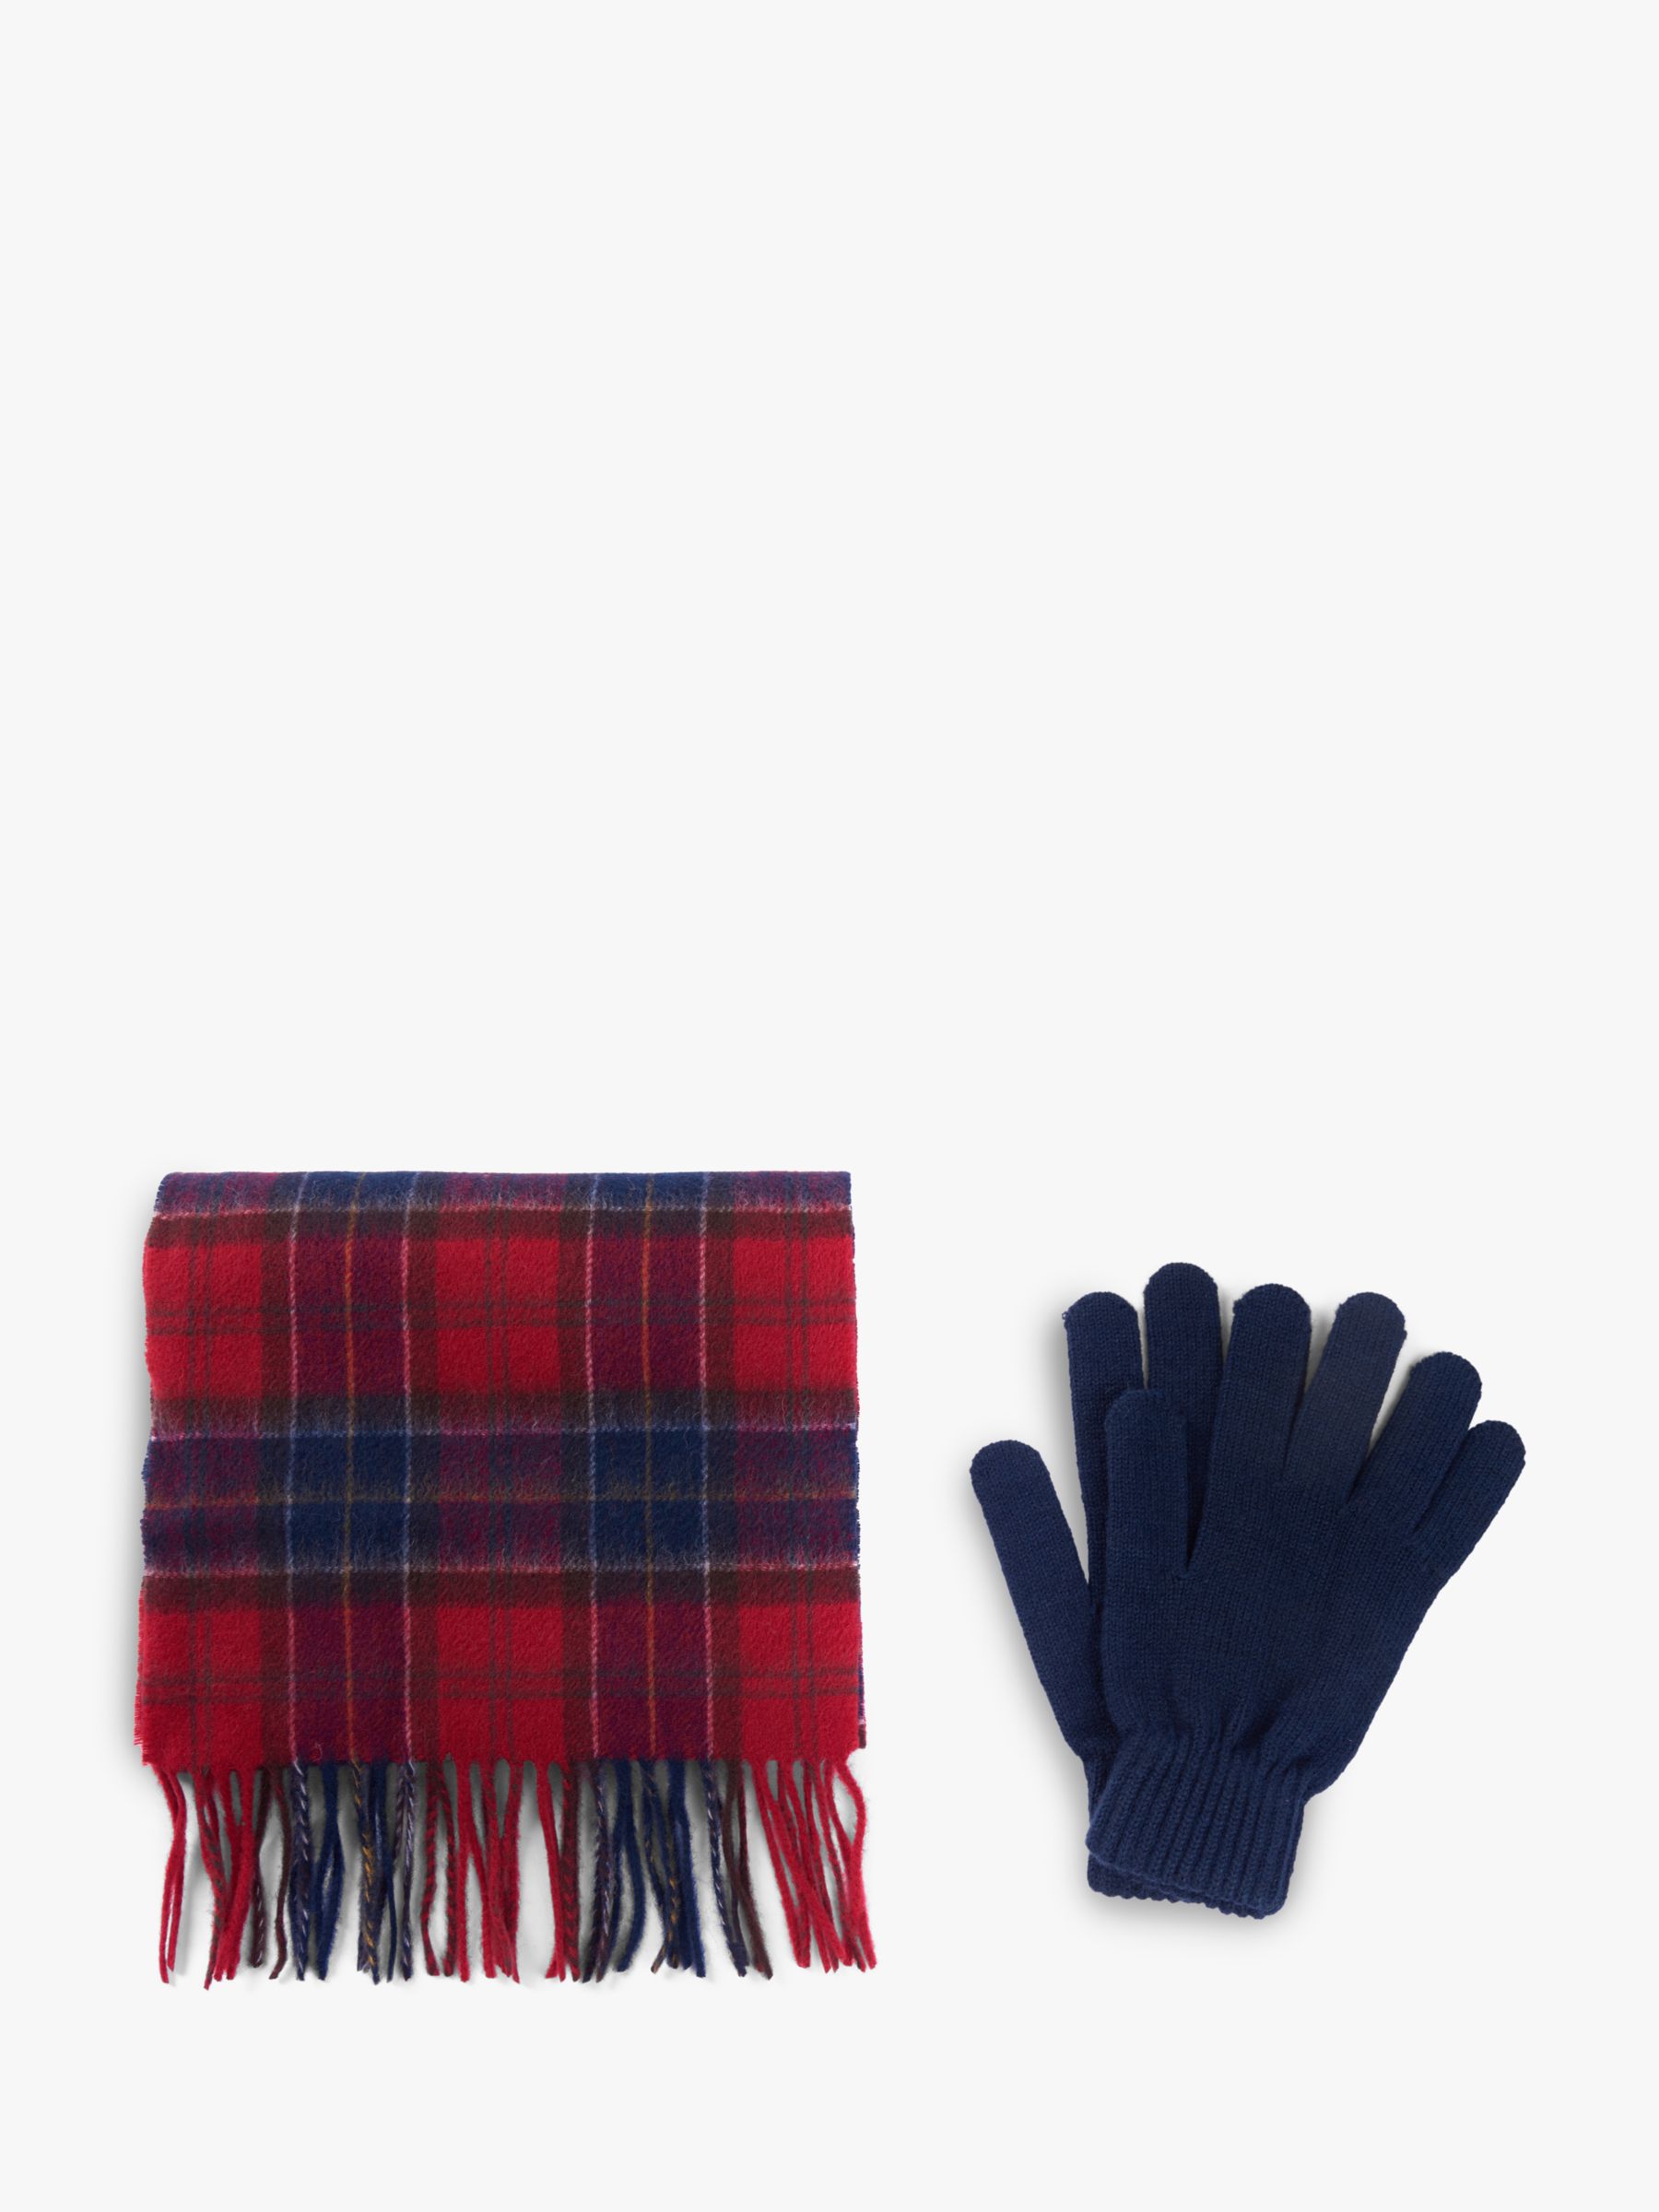 barbour scarf and glove gift box